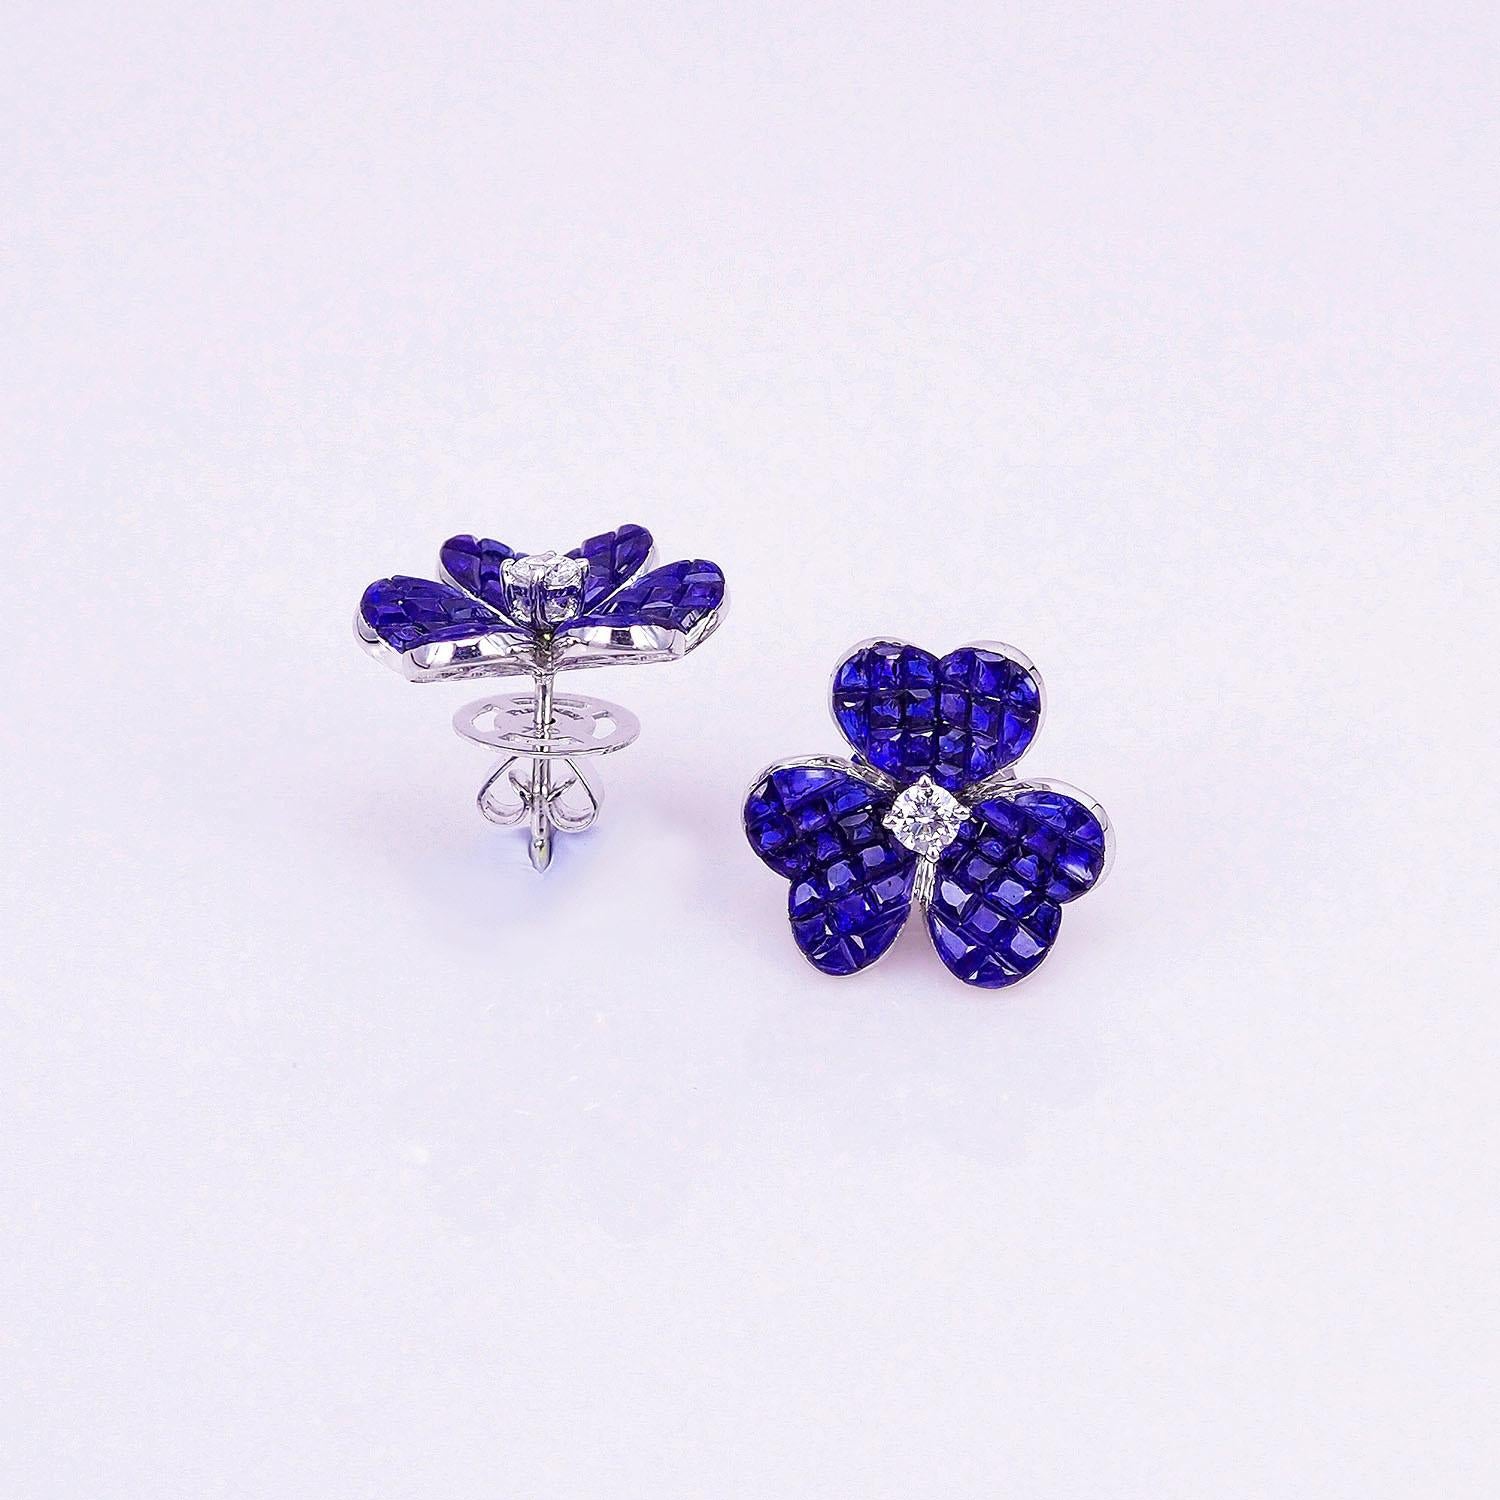 Sapphire stud earrings design as classic luxury elegant style. You can use for everyday and also for the evening party. We use the top quality Sapphire which make in invisible setting. We set the stone in perfection as we are professional in this